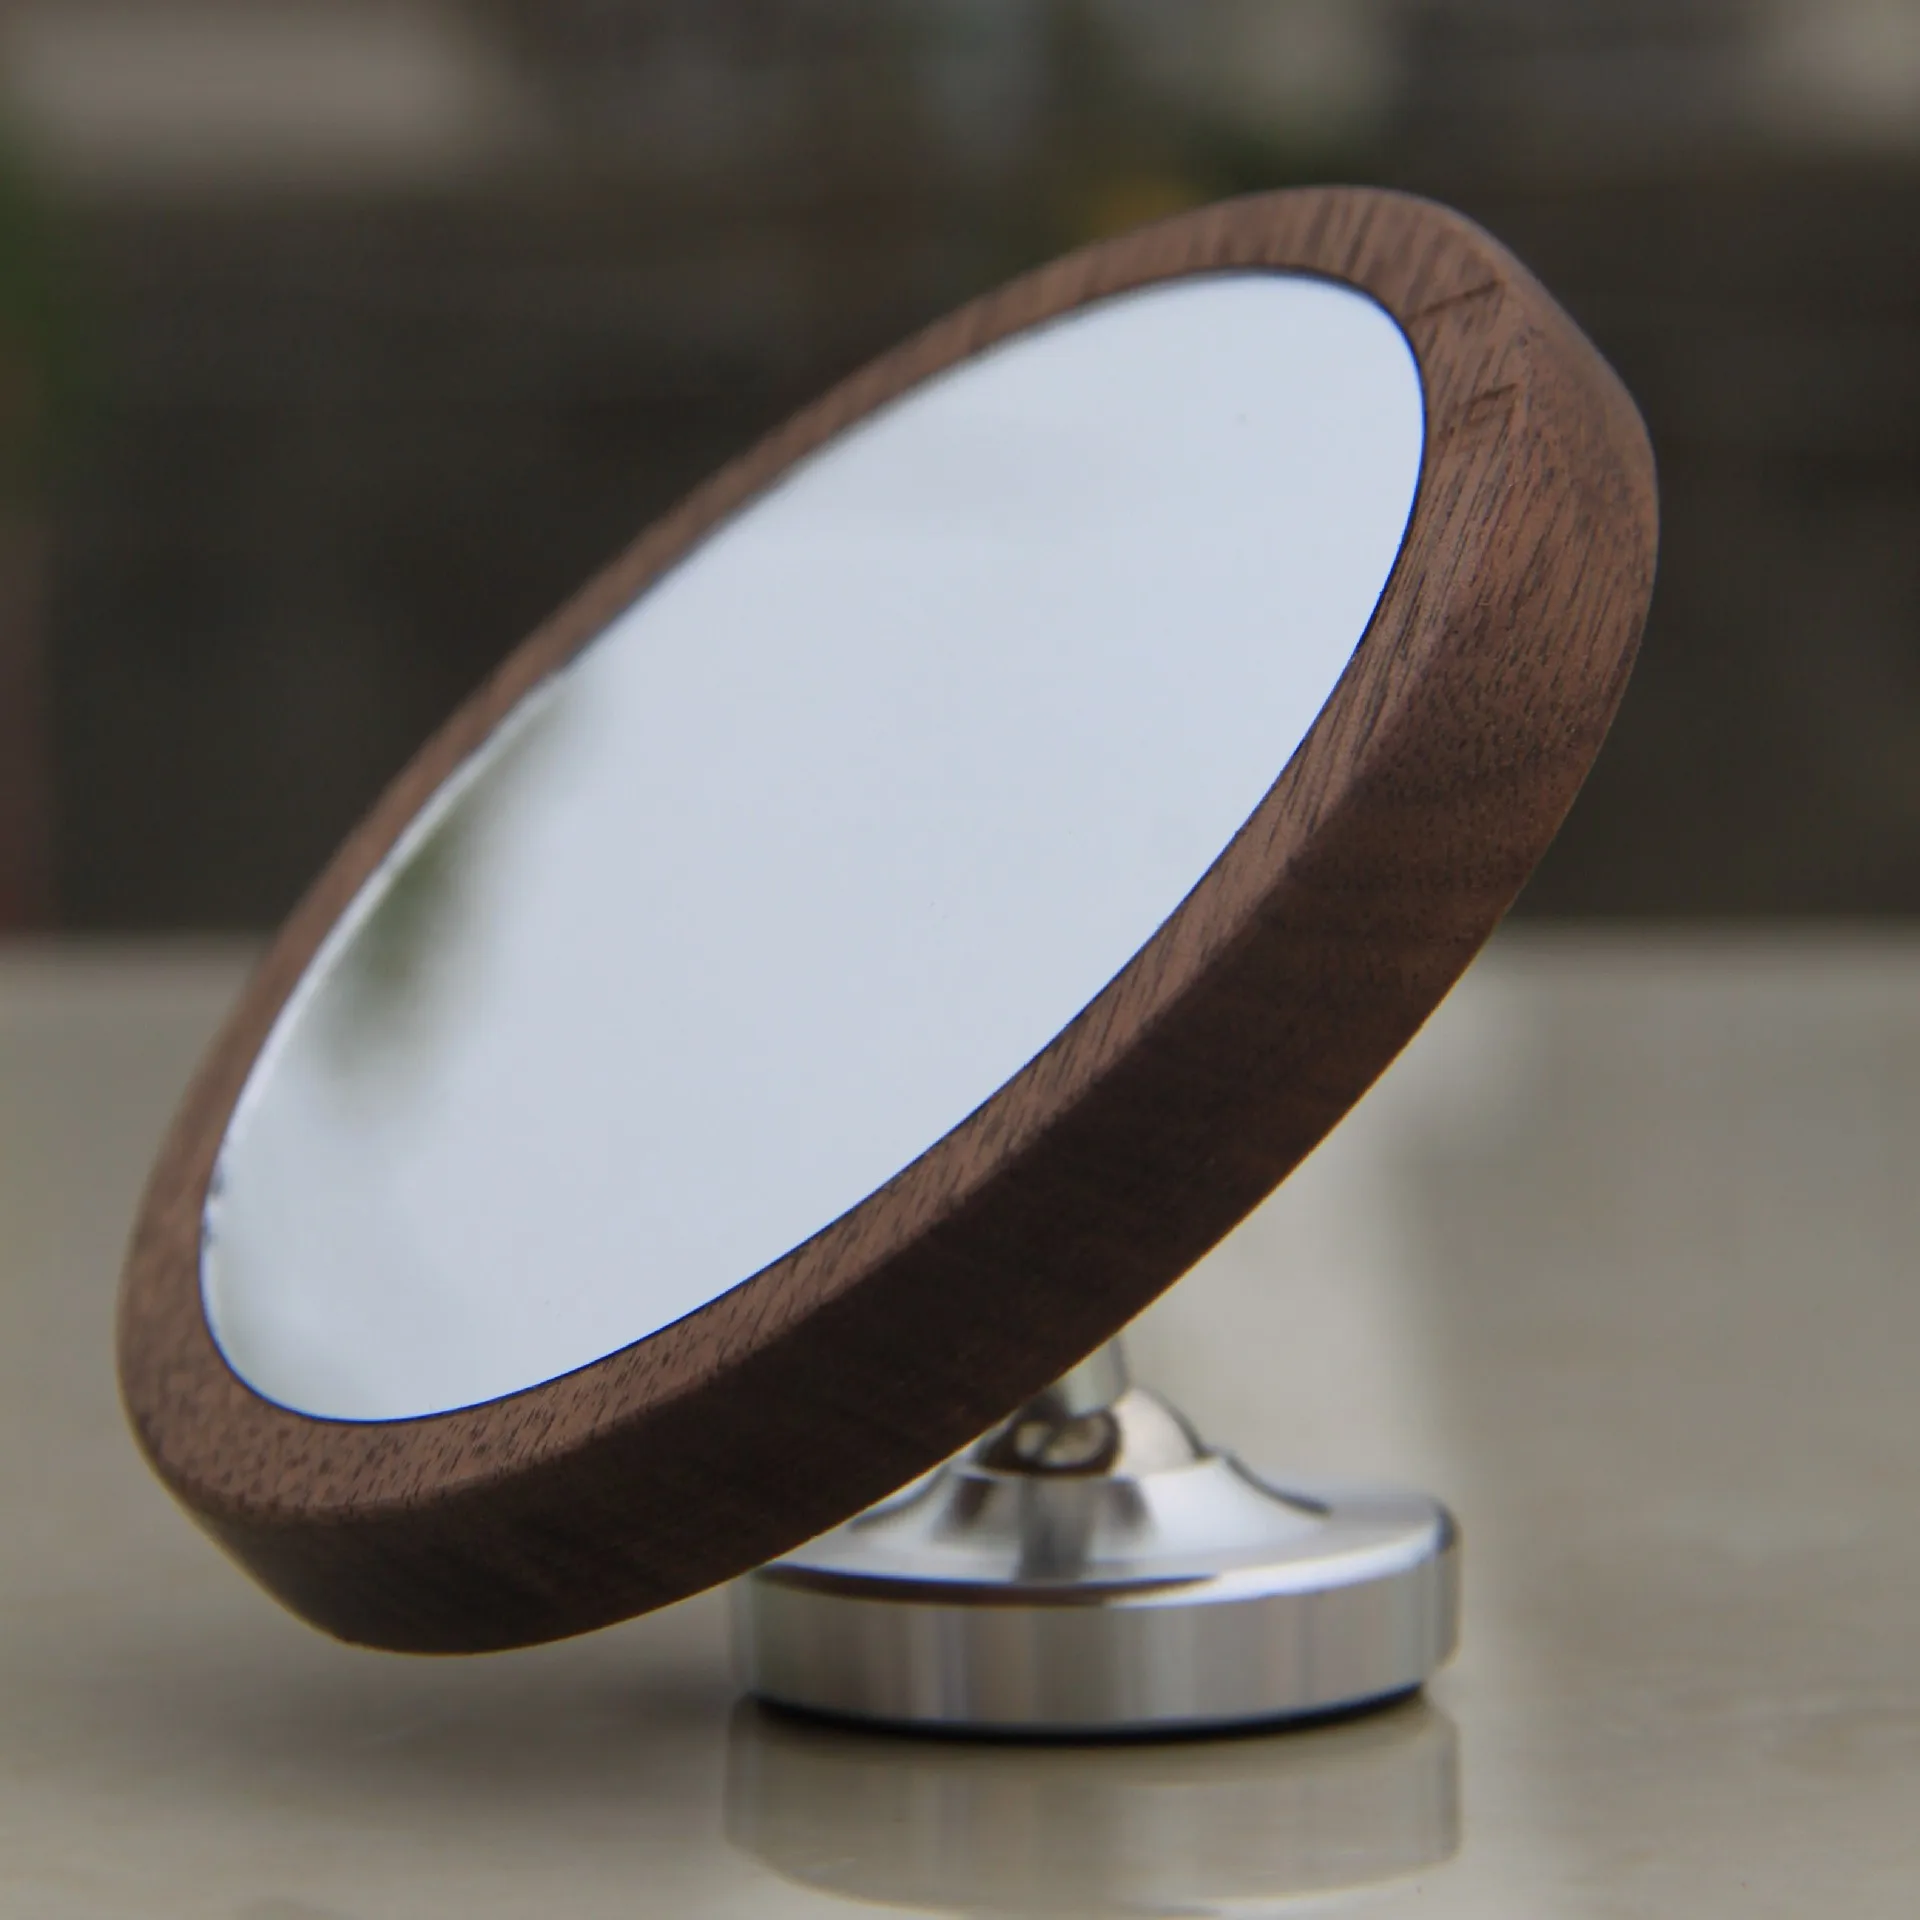 

Walnut/Beech Espresso Lens Flow Rate Observation Wooden Base Magnetic Coffee Tampering Reflective Mirror for Cafe Machine Tool